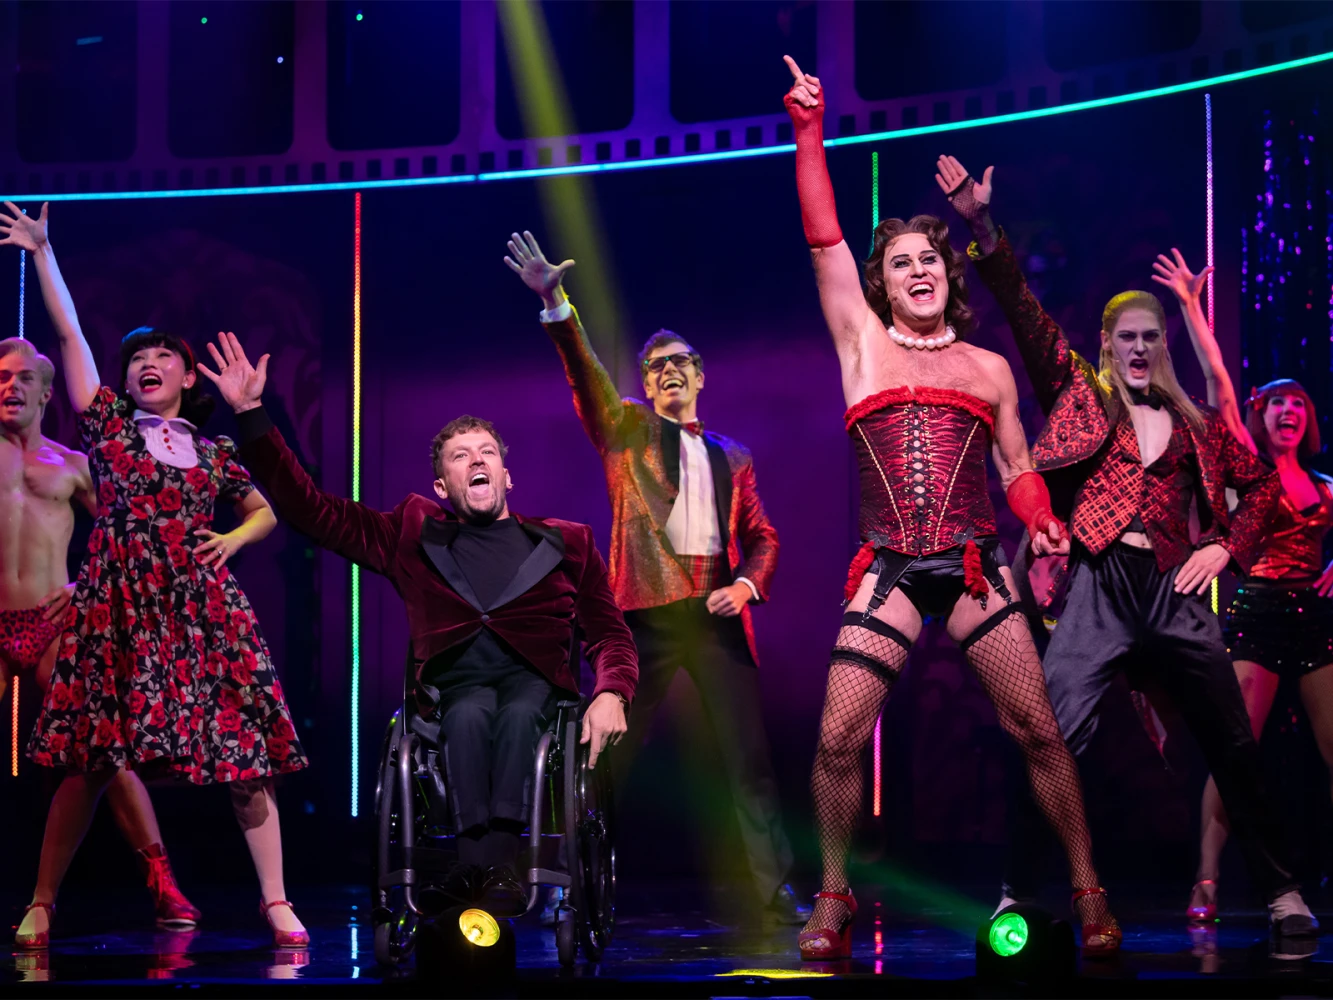 The Rocky Horror Show: What to expect - 9